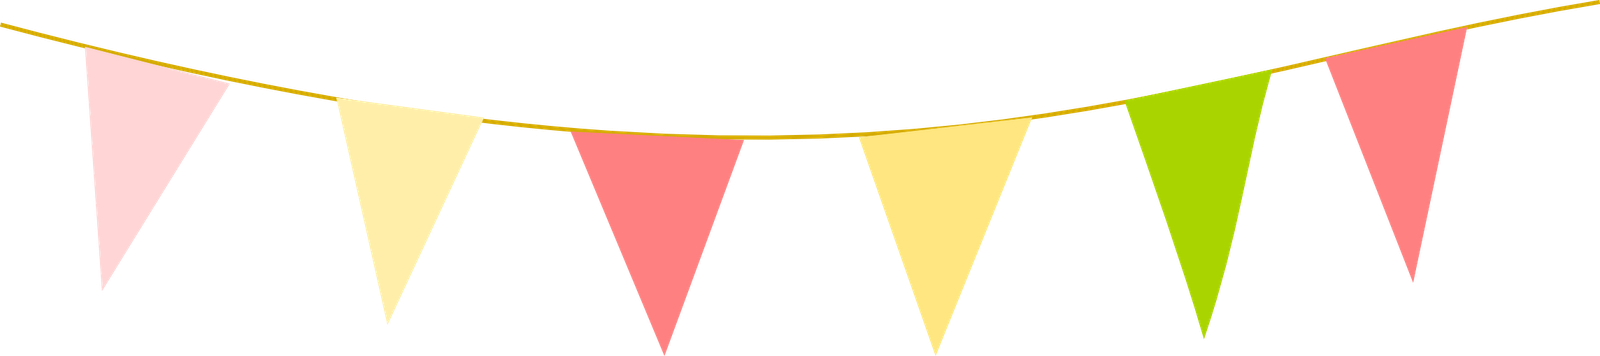 ornament clipart bunting